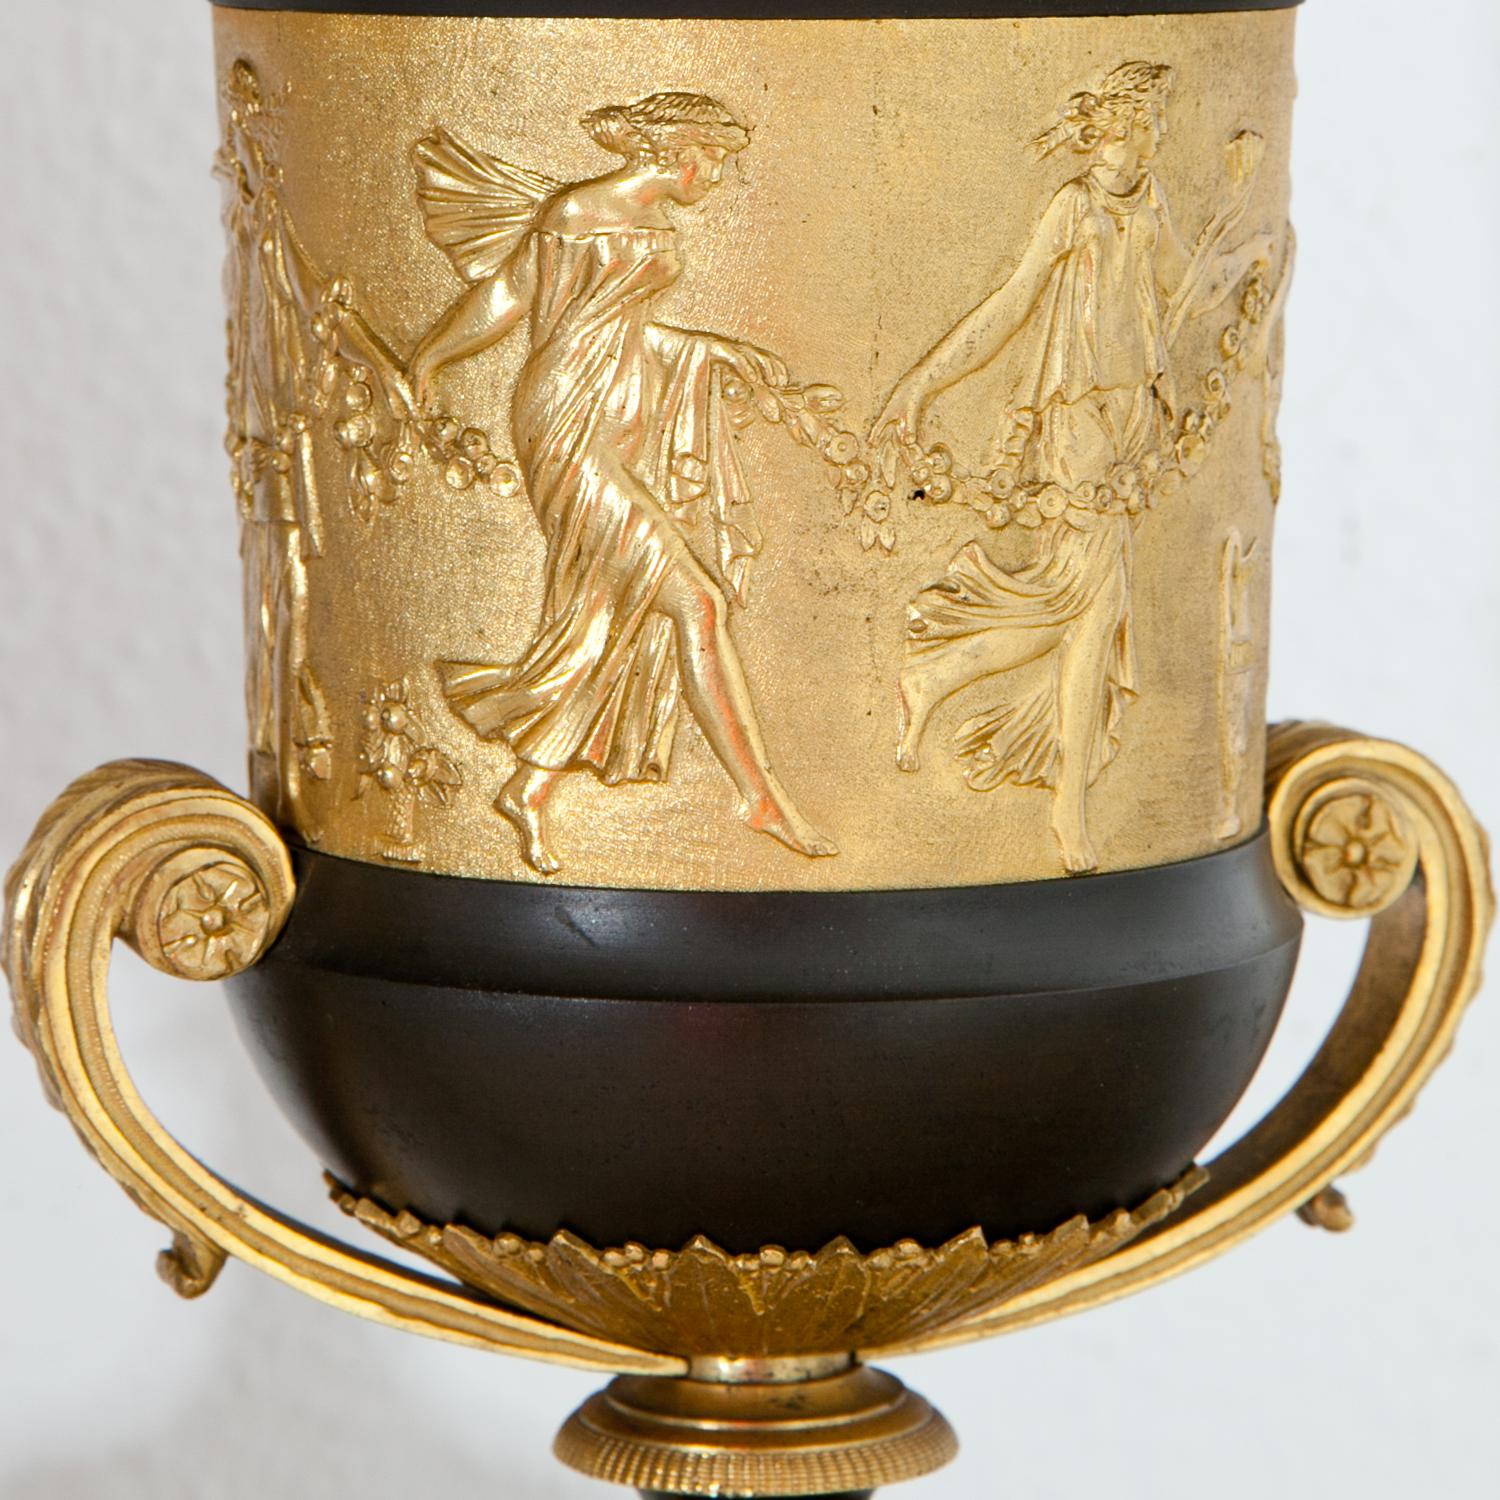 Pair of partly gilt Brûle-Parfum urns, attributed to Claude Gallé, standing on grey marble bases with Hermes mascarons. The urns are decorated with a gilt relief wall depicting dancing Maenads. The lid and the rim show ajour work. The urns come from